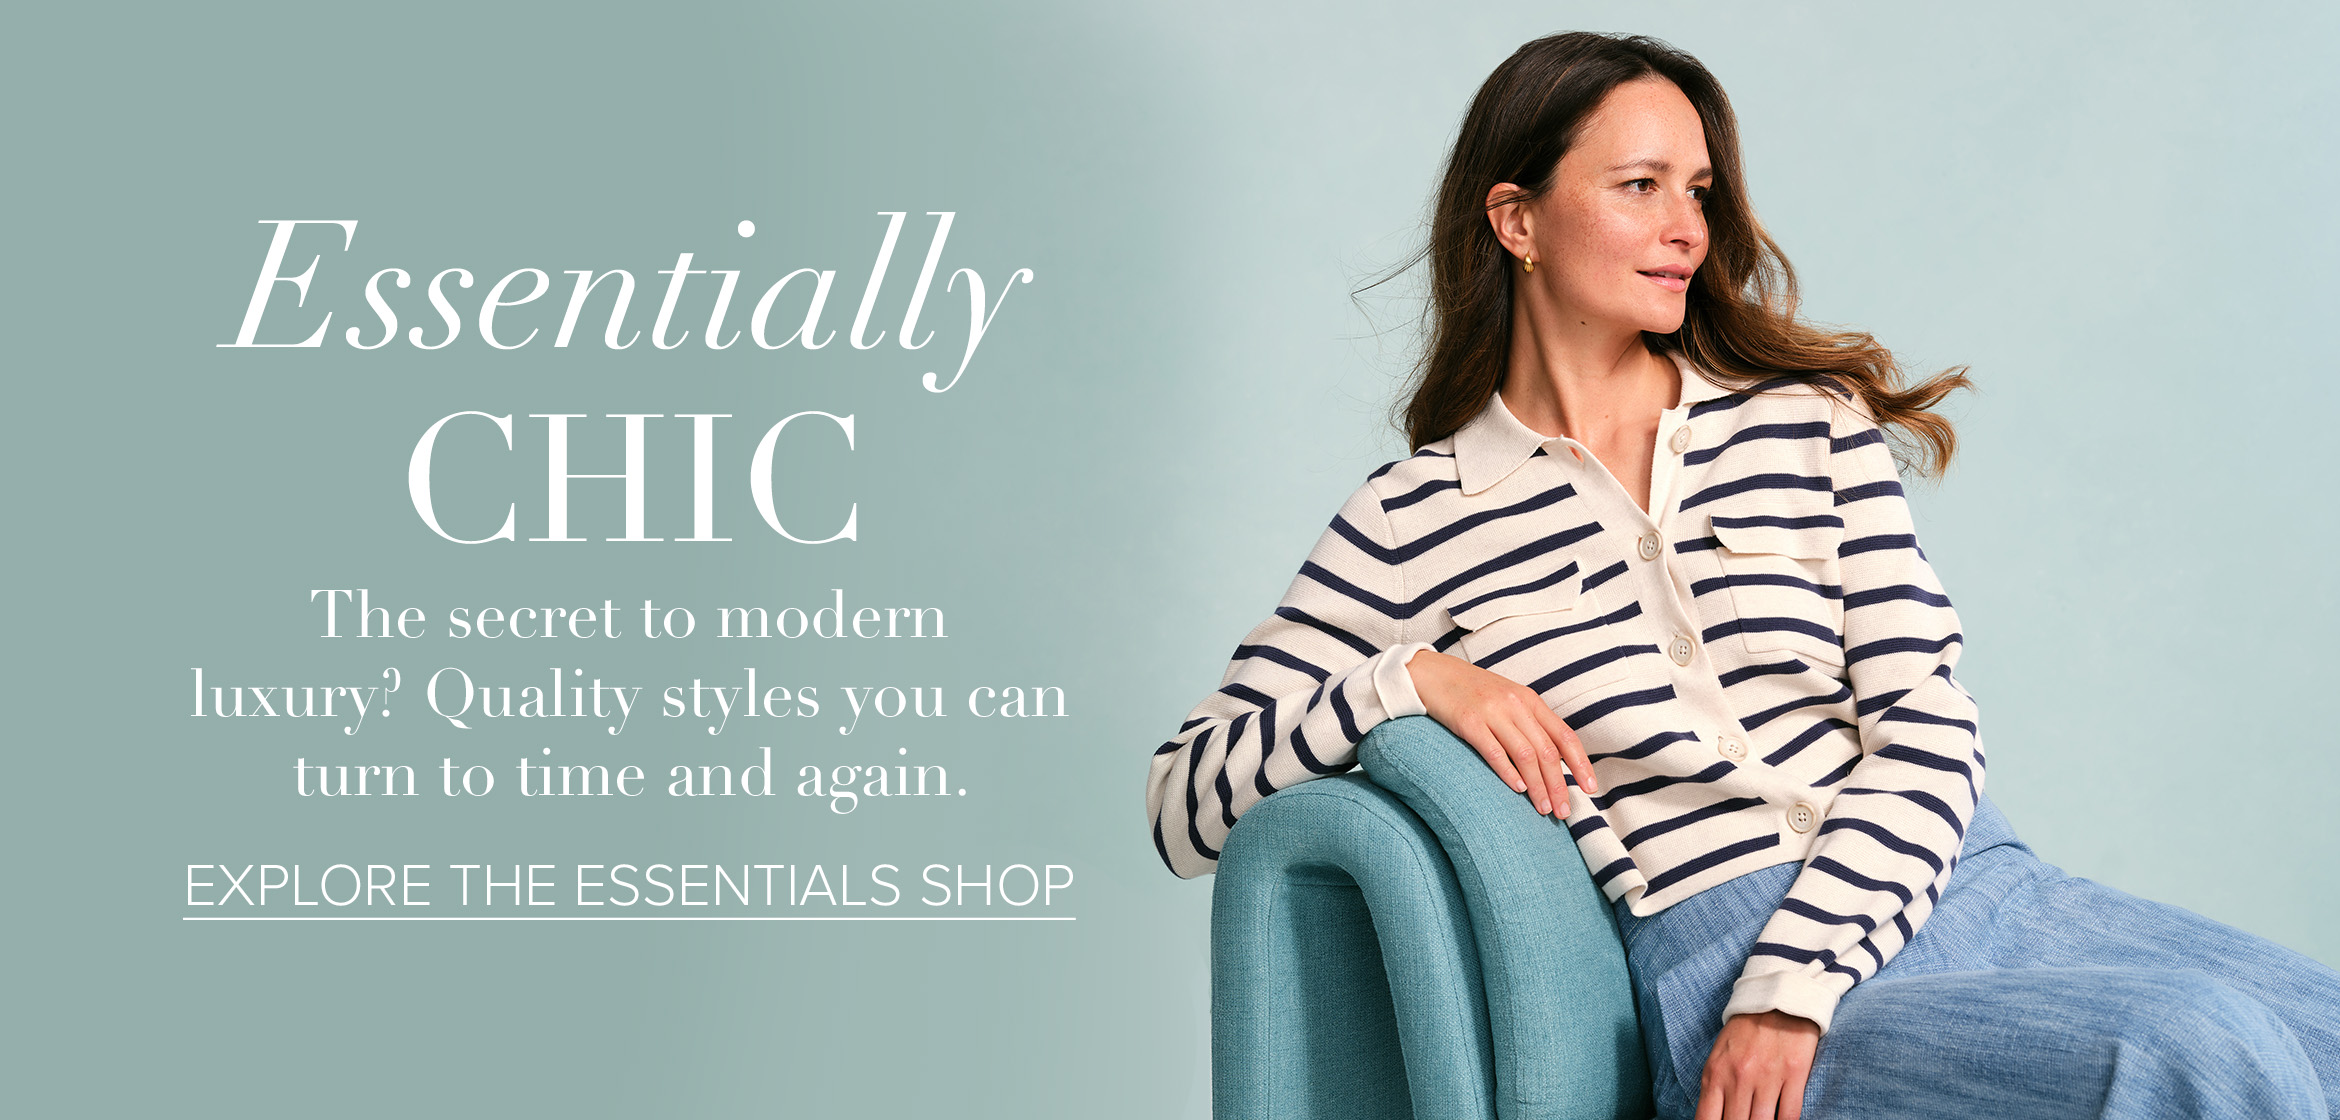 Essentially CHIC The secret to modern luxury? Quality styles you can turn to time and again. EXPLORE THE ESSENTIALS SHOP